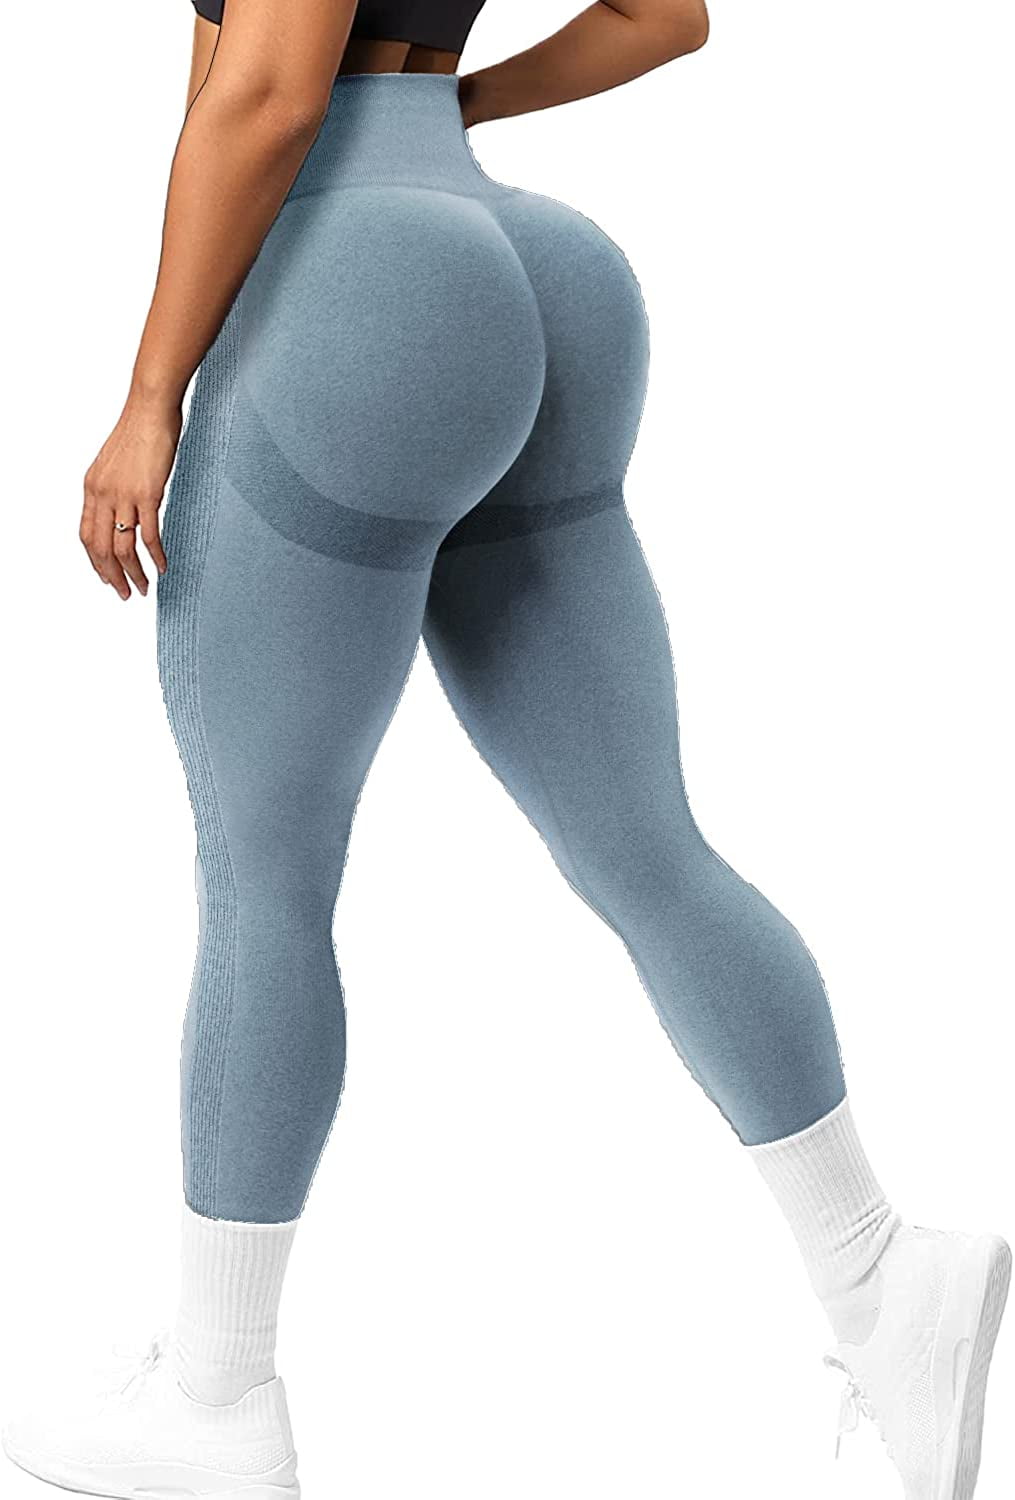 Uncia Active Women's Leggings High Waisted Yoga Pants High Stretch Soft  Brushed Fabric Seamless Tummy Control Compression Activewear Workout in  Comfort 